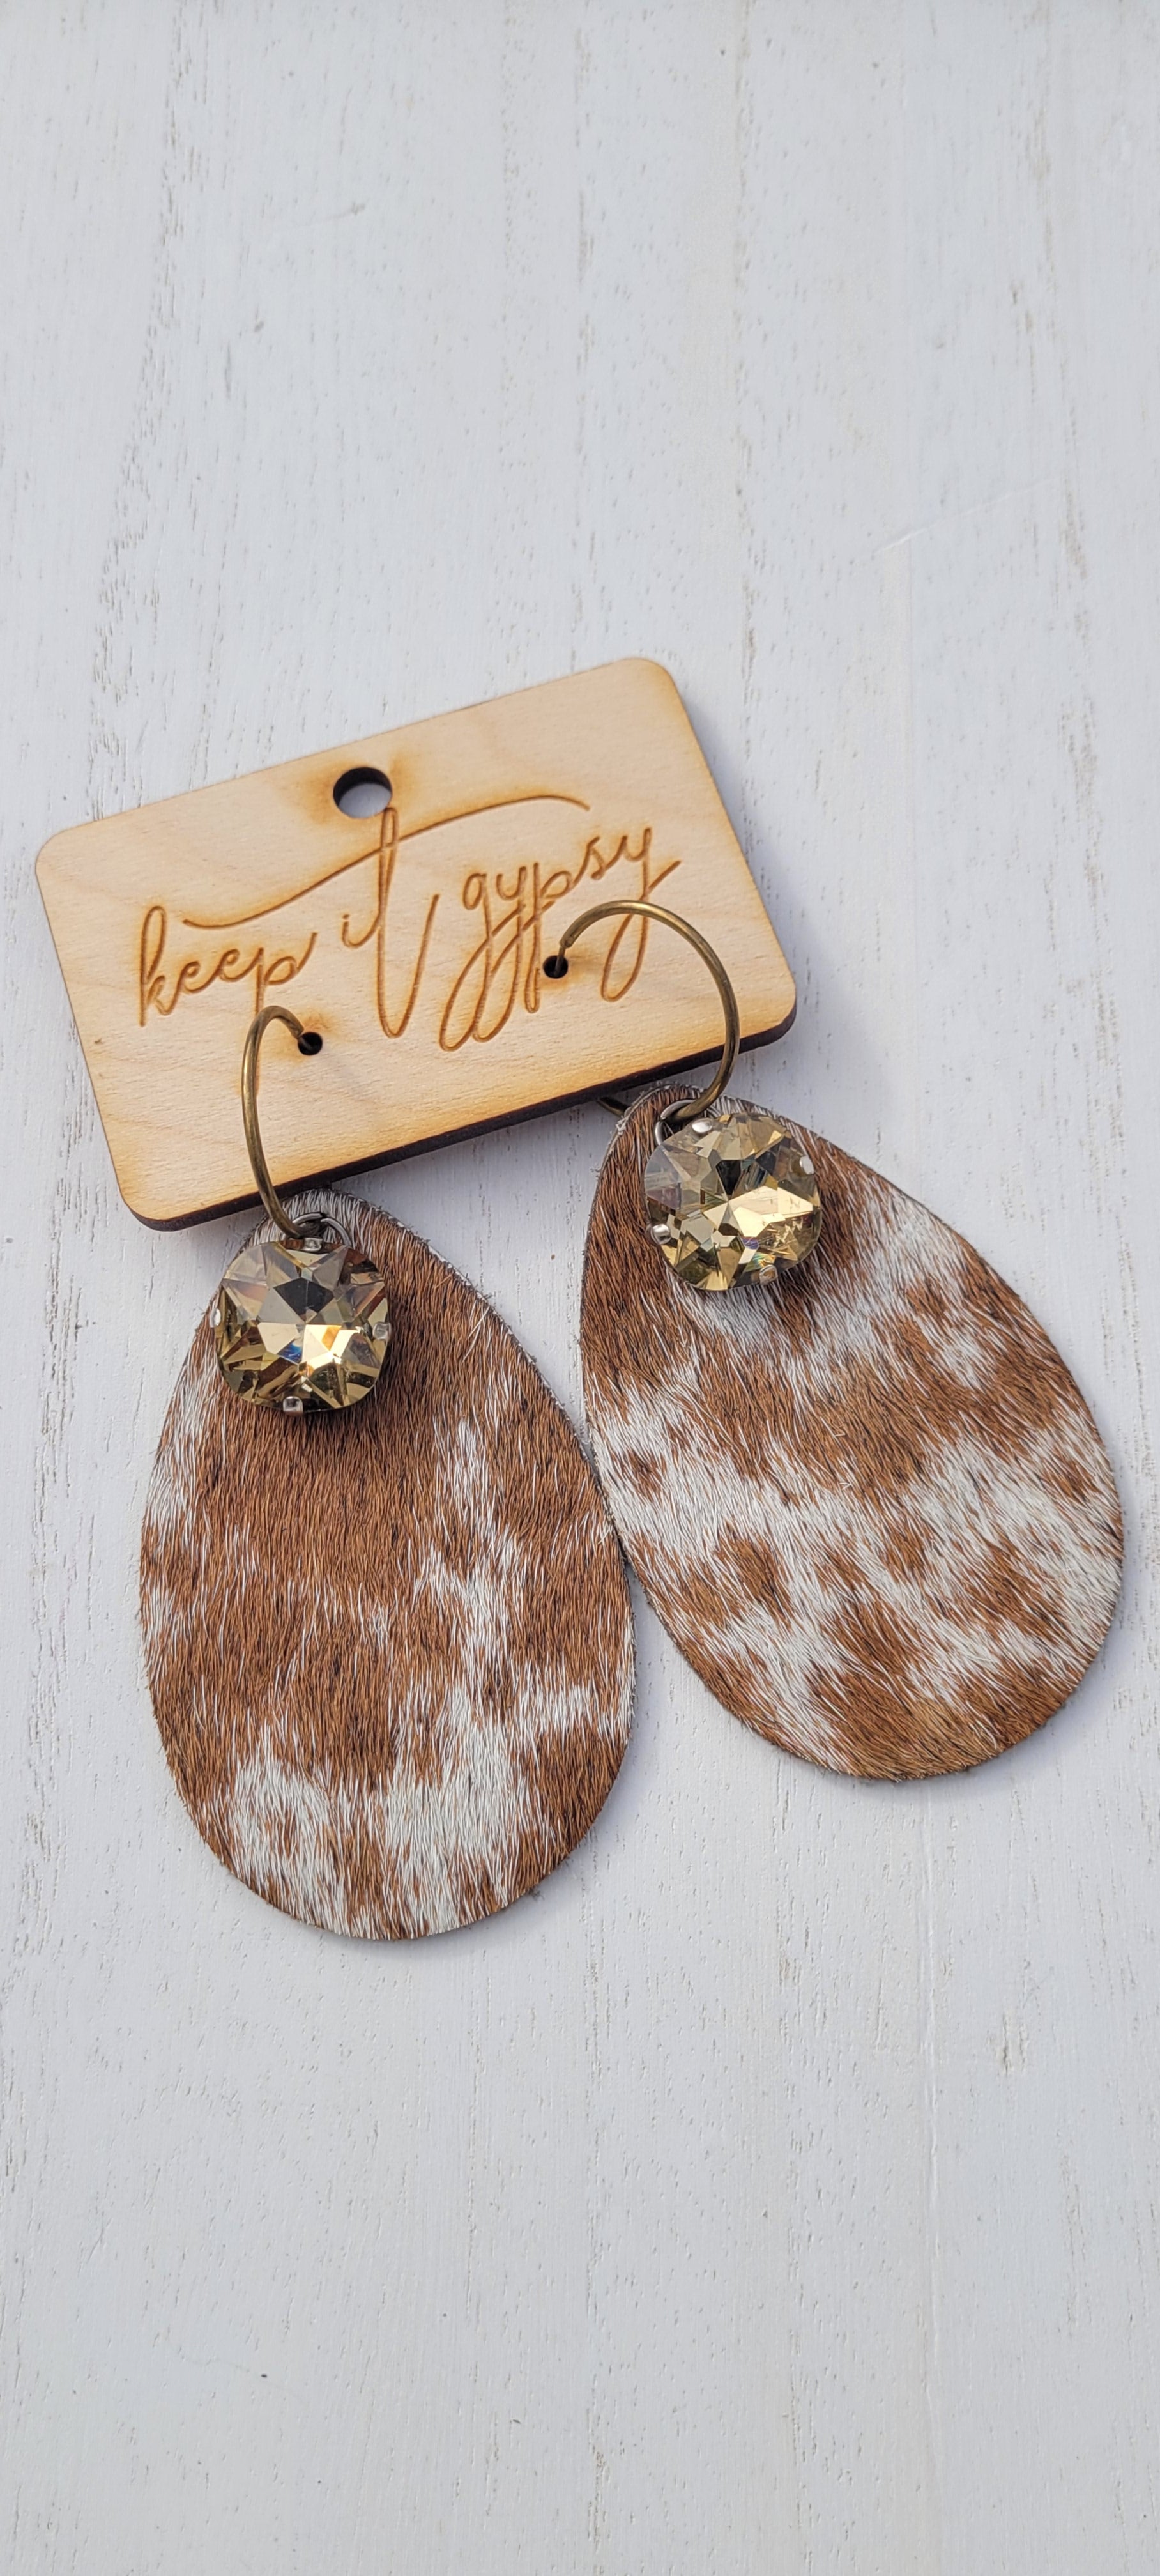 Upcycled Cow Print Cowhide Earrings Light Gold Crystals Brown and White Limited supply!    Due to the nature of leather/suede, small variances of color in the skin may occur, this is in no way considered a defect. These are inherent characteristics of leather/suede and will enhance the individual look of your garment.   